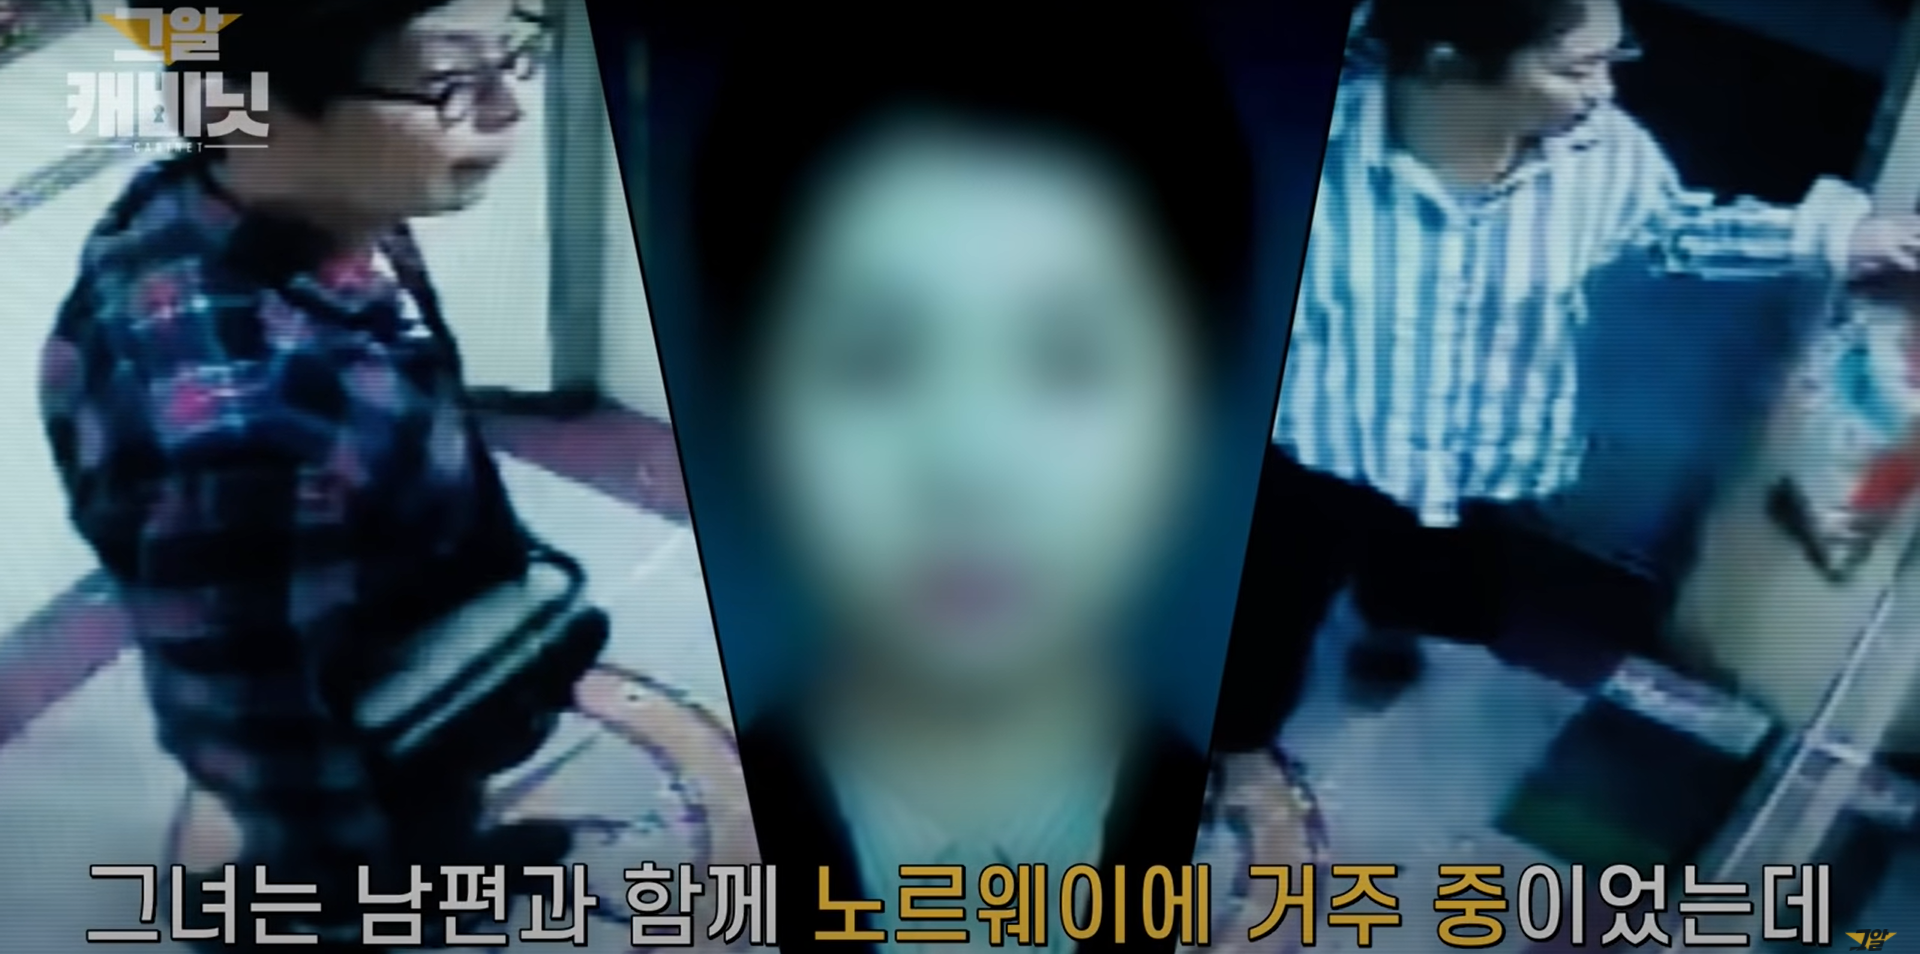 unsolved crimes in korea - Ms Jang